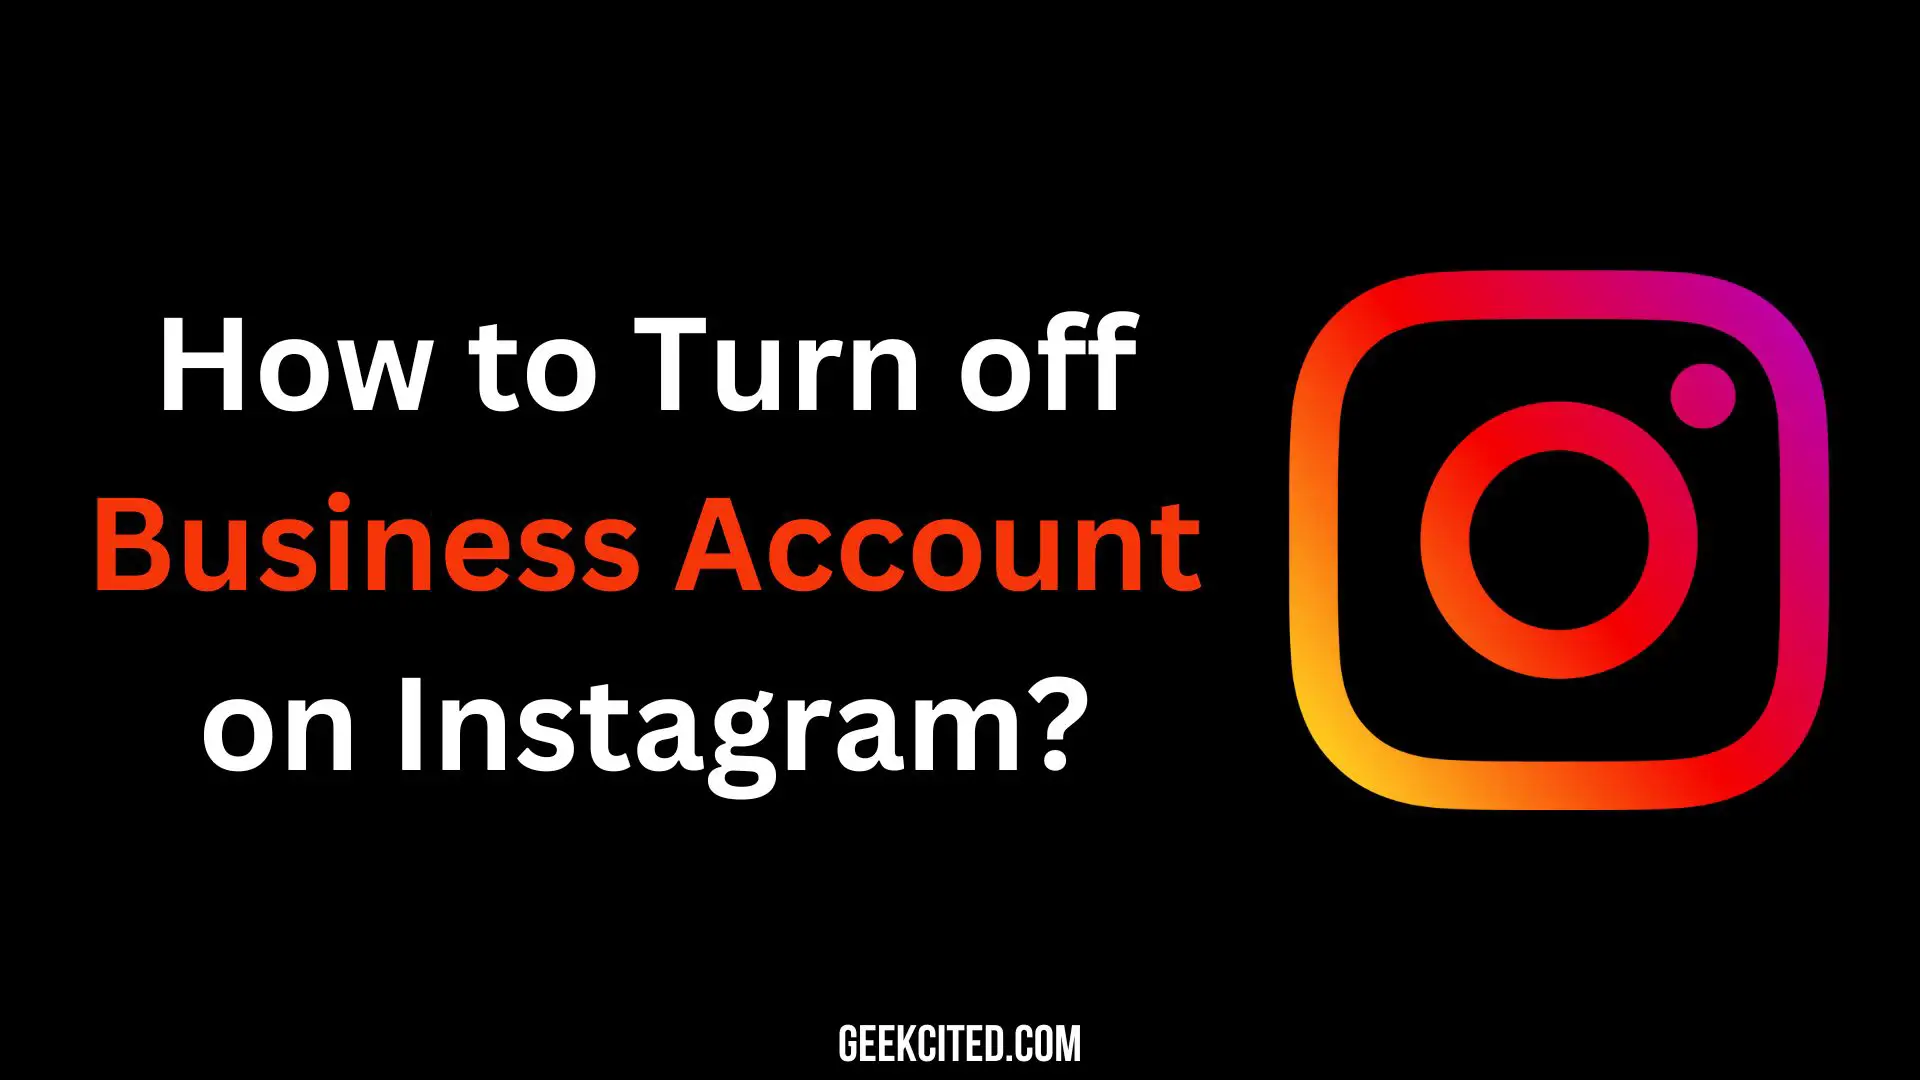 How to Turn Off Your Business Account on Instagram? A Step-by-Step Guide for a Seamless Transition